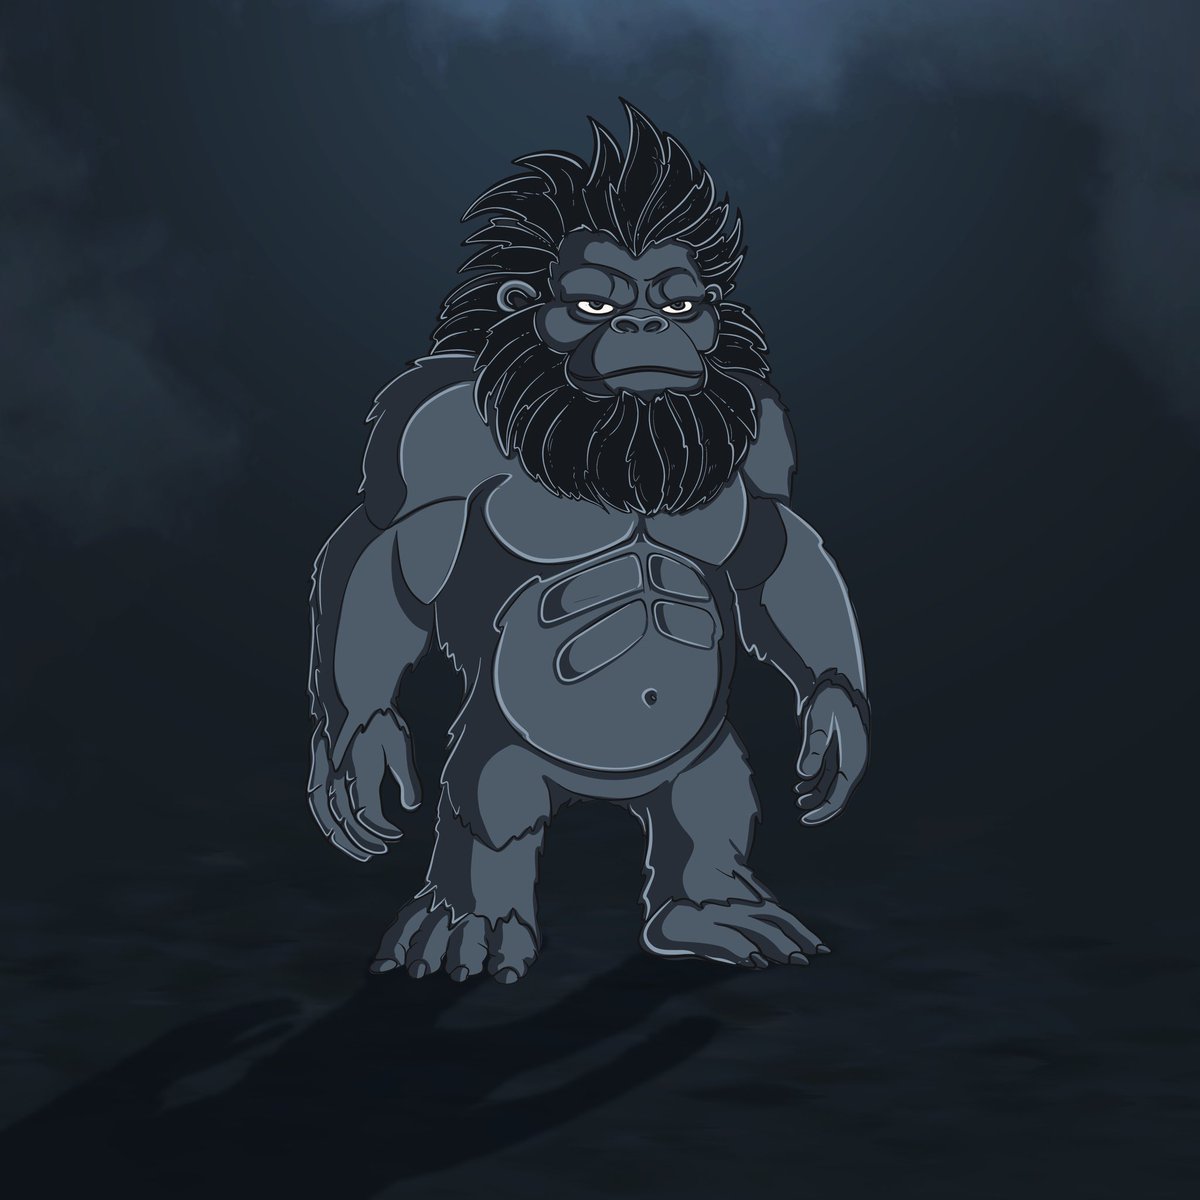 FootBig - described as a large ape-like creature that trolls the forest. While short and stout, this legend can travel great distances in a short amount of time.